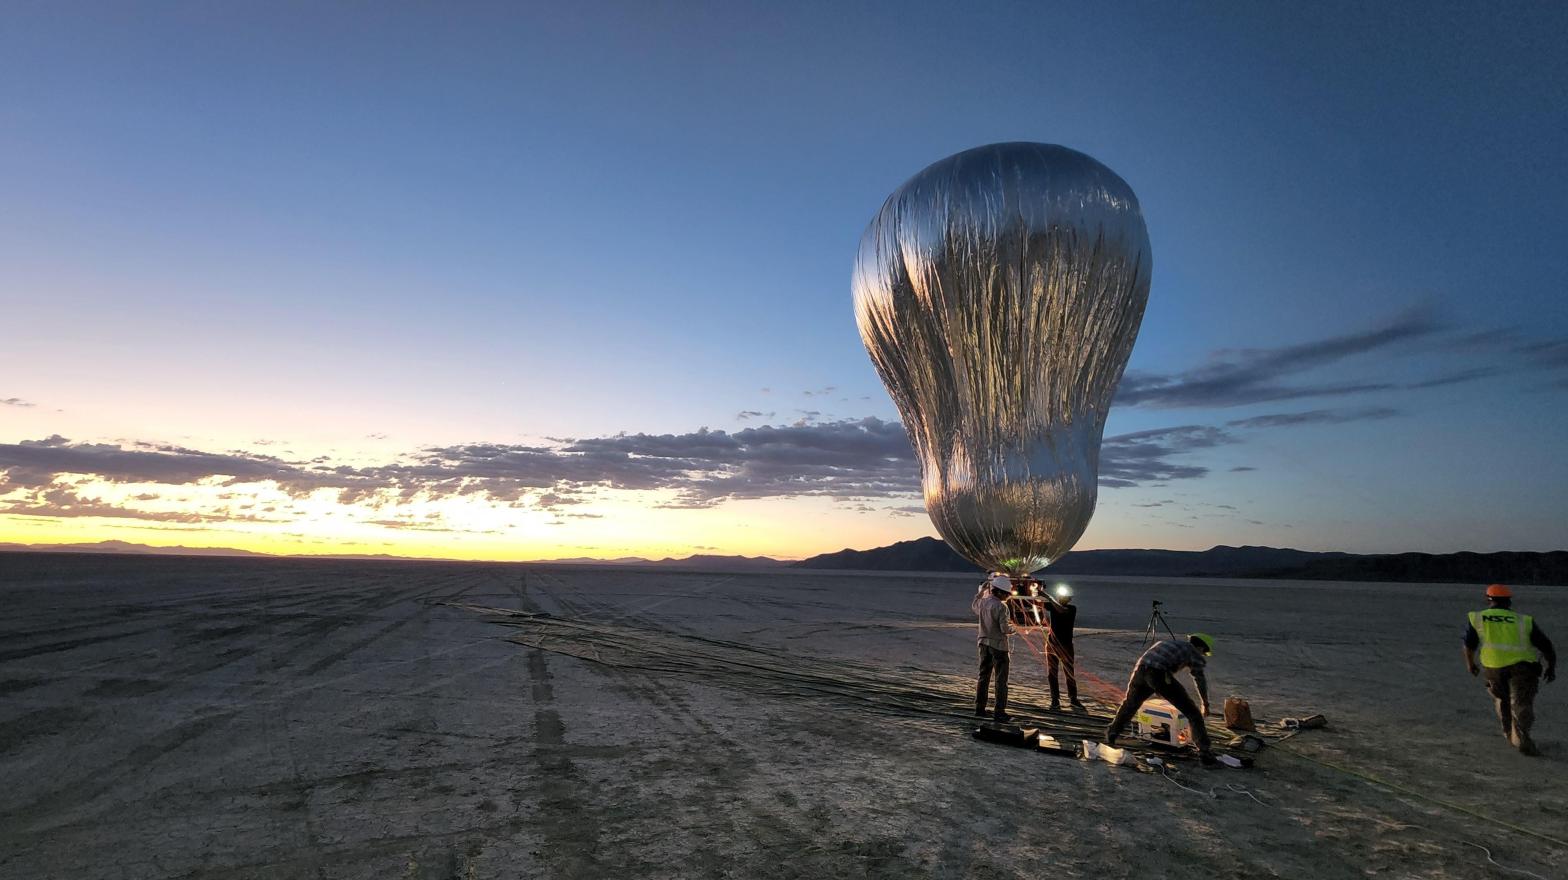 The team preparing the prototype aerial robotic balloon for a test flight above the Black Rock Desert in Nevada. (Photo: NASA)